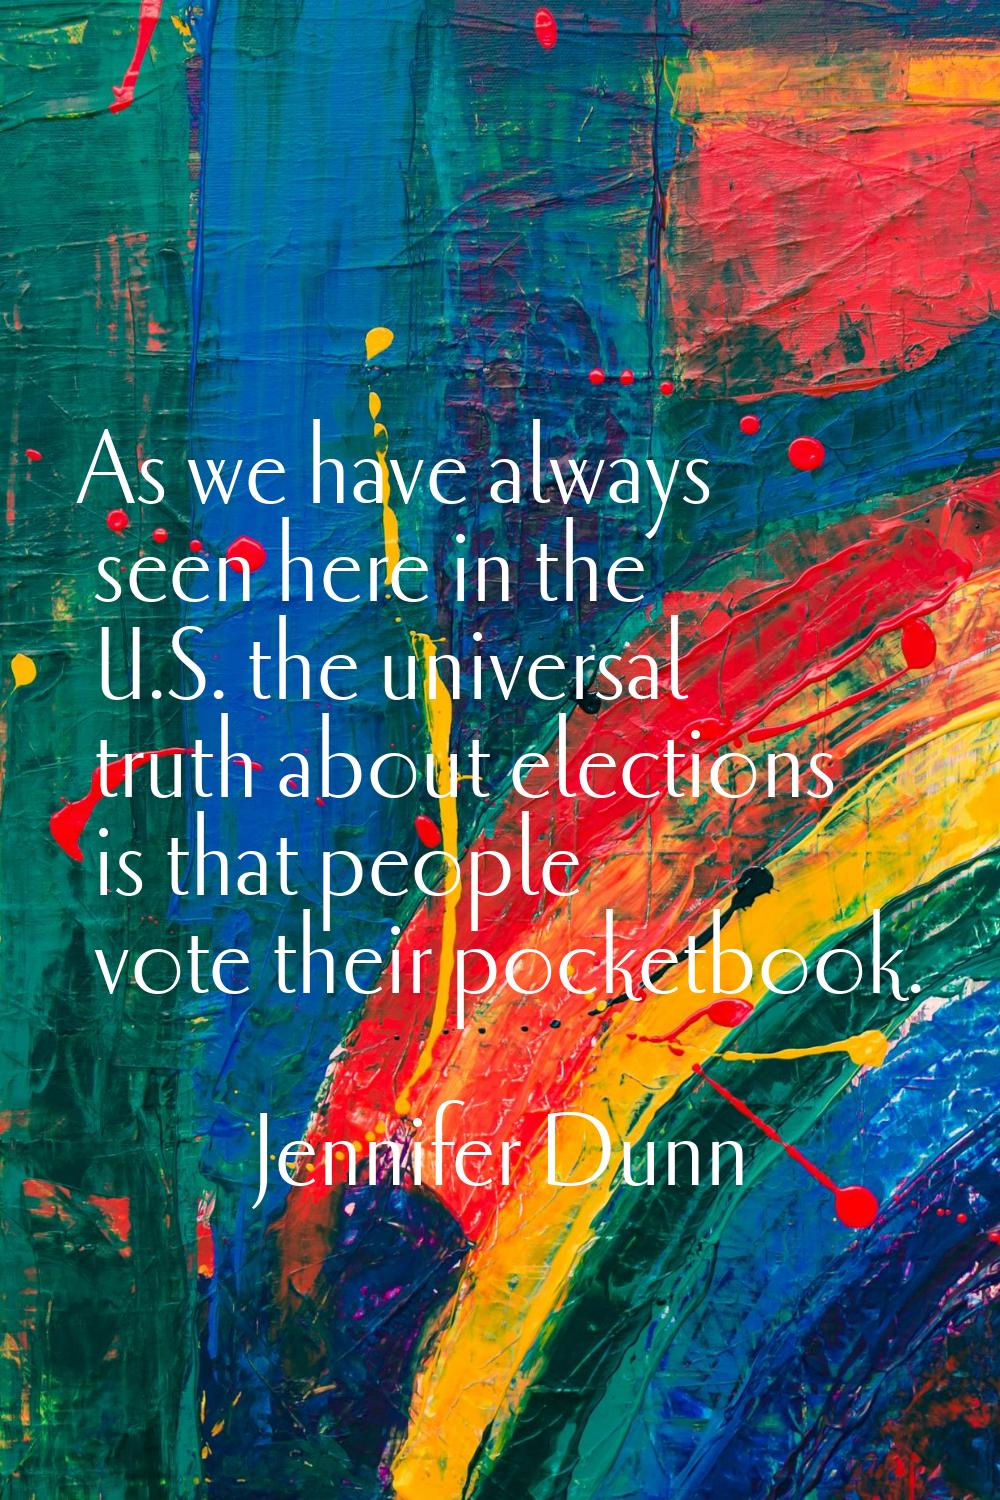 As we have always seen here in the U.S. the universal truth about elections is that people vote the